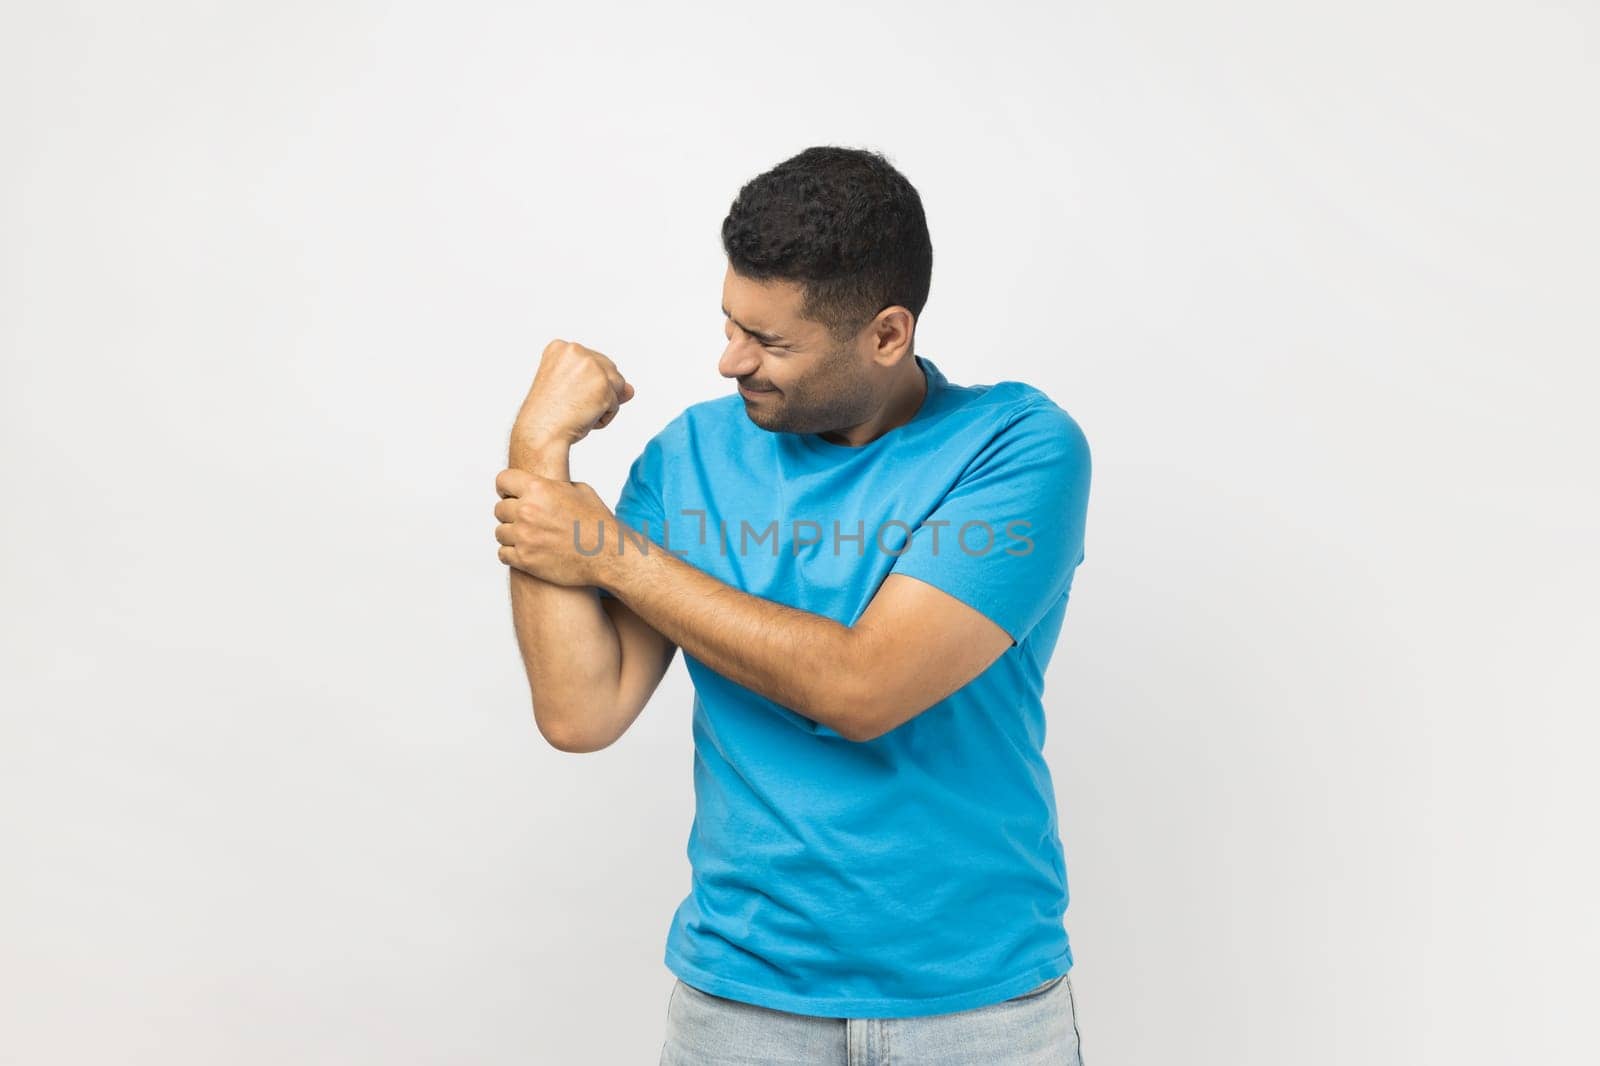 Portrait of unhealthy sick injured unshaven man wearing blue T- shirt standing holding his painful wrist, feels terrible pain, has trauma. Indoor studio shot isolated on gray background.